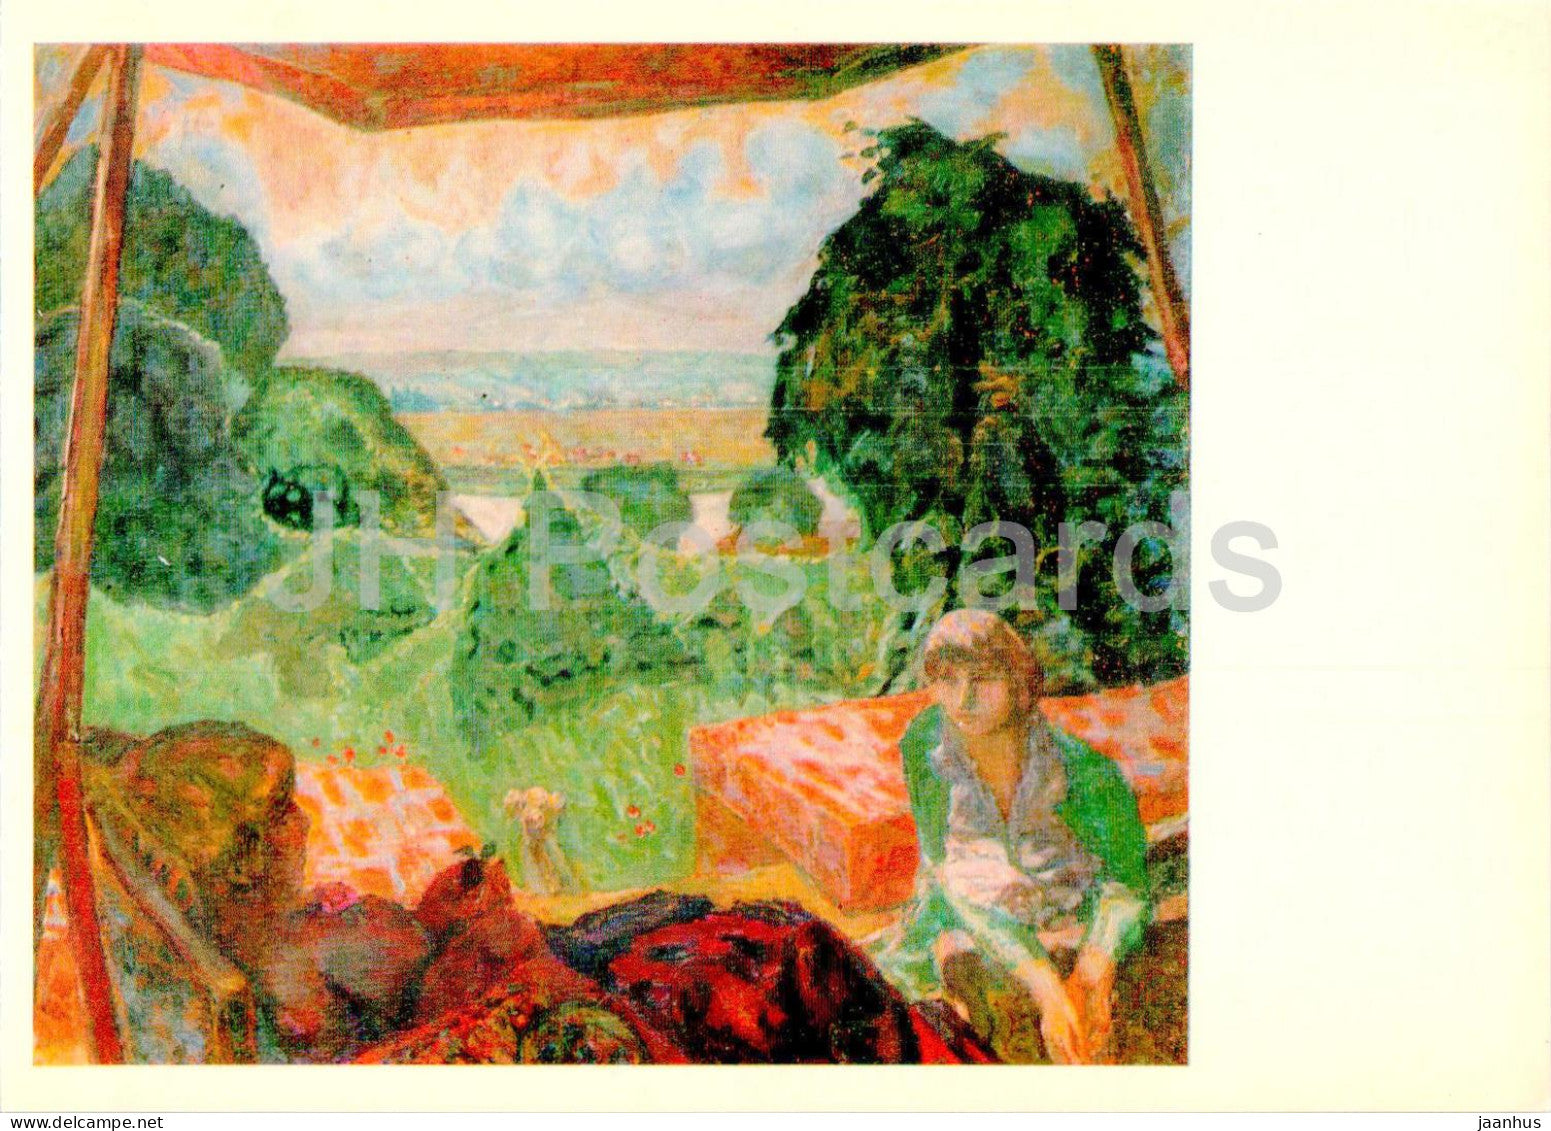 painting by Pierre Bonnard - Summer in Normandie - French art - 1977 - Russia USSR - unused - JH Postcards